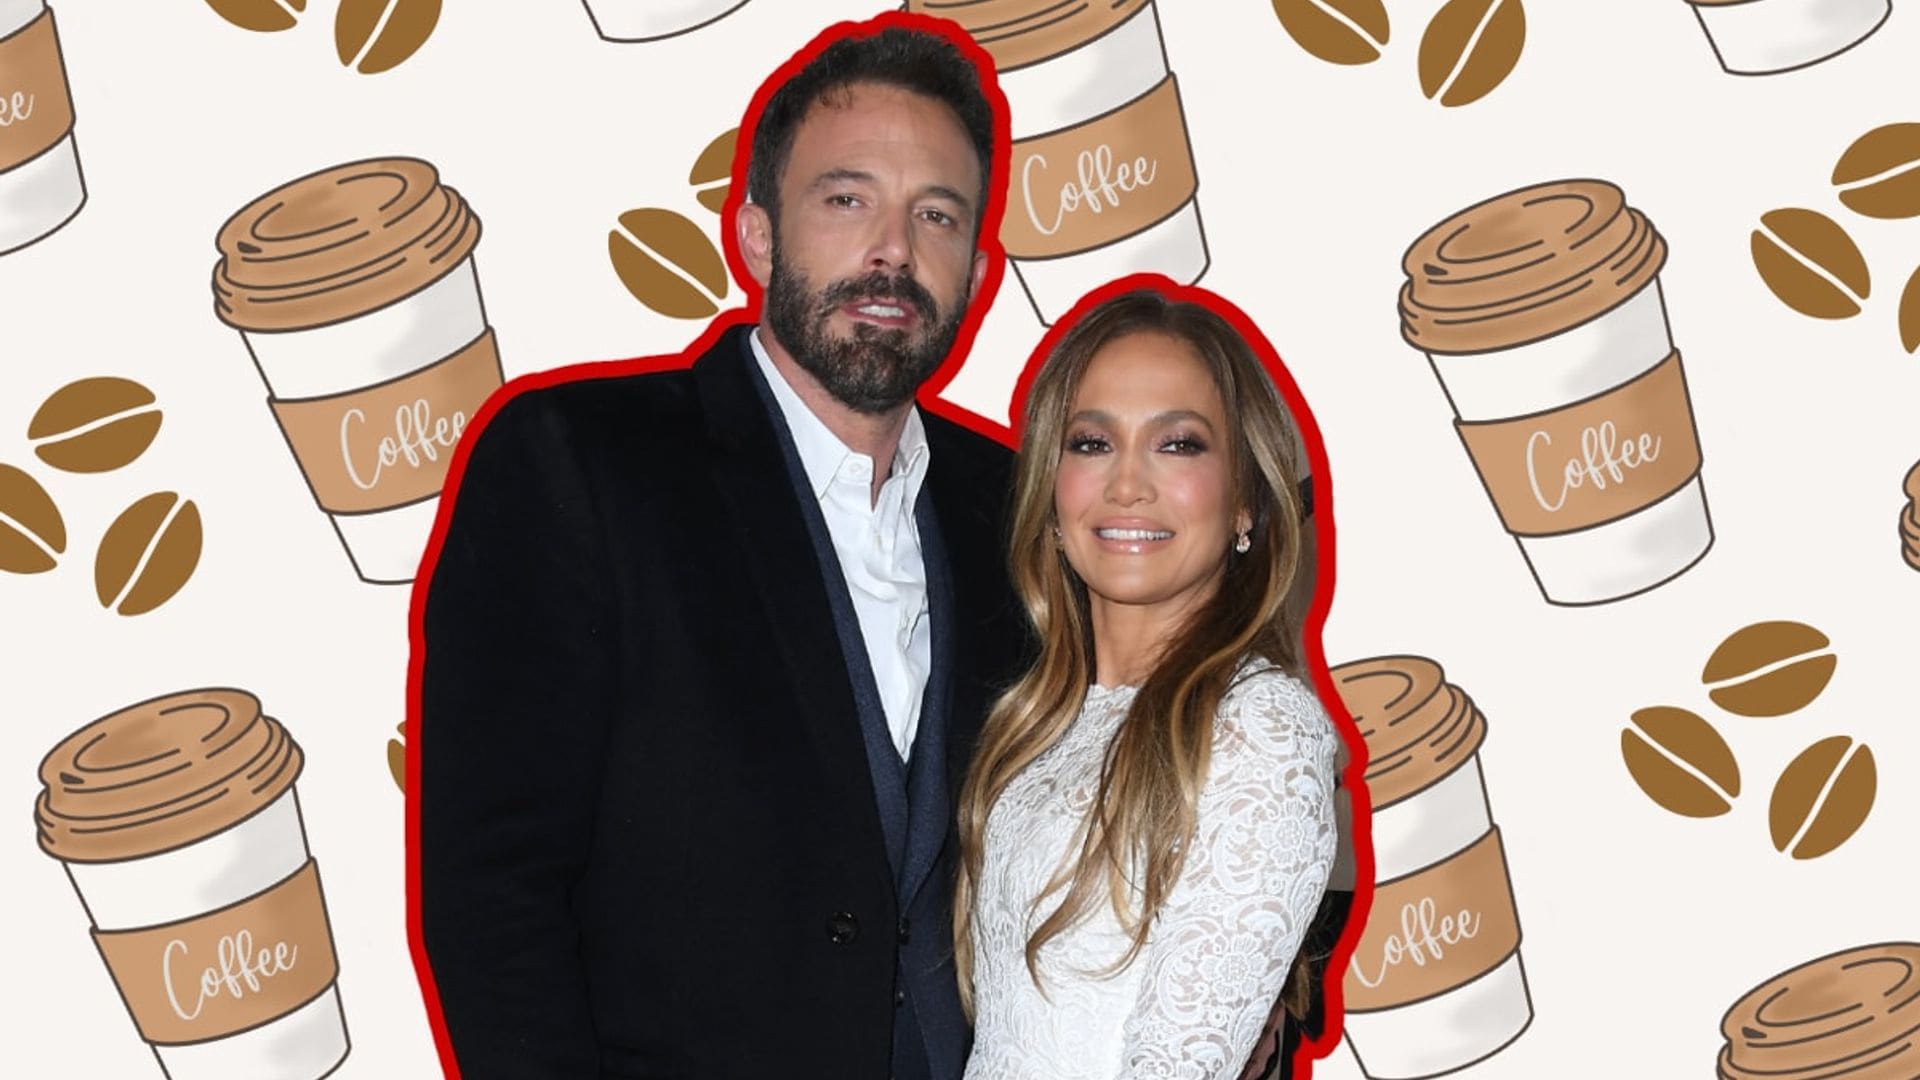 Ben Affleck and Jennifer Lopez filmed a commercial for a famous coffee shop in Boston